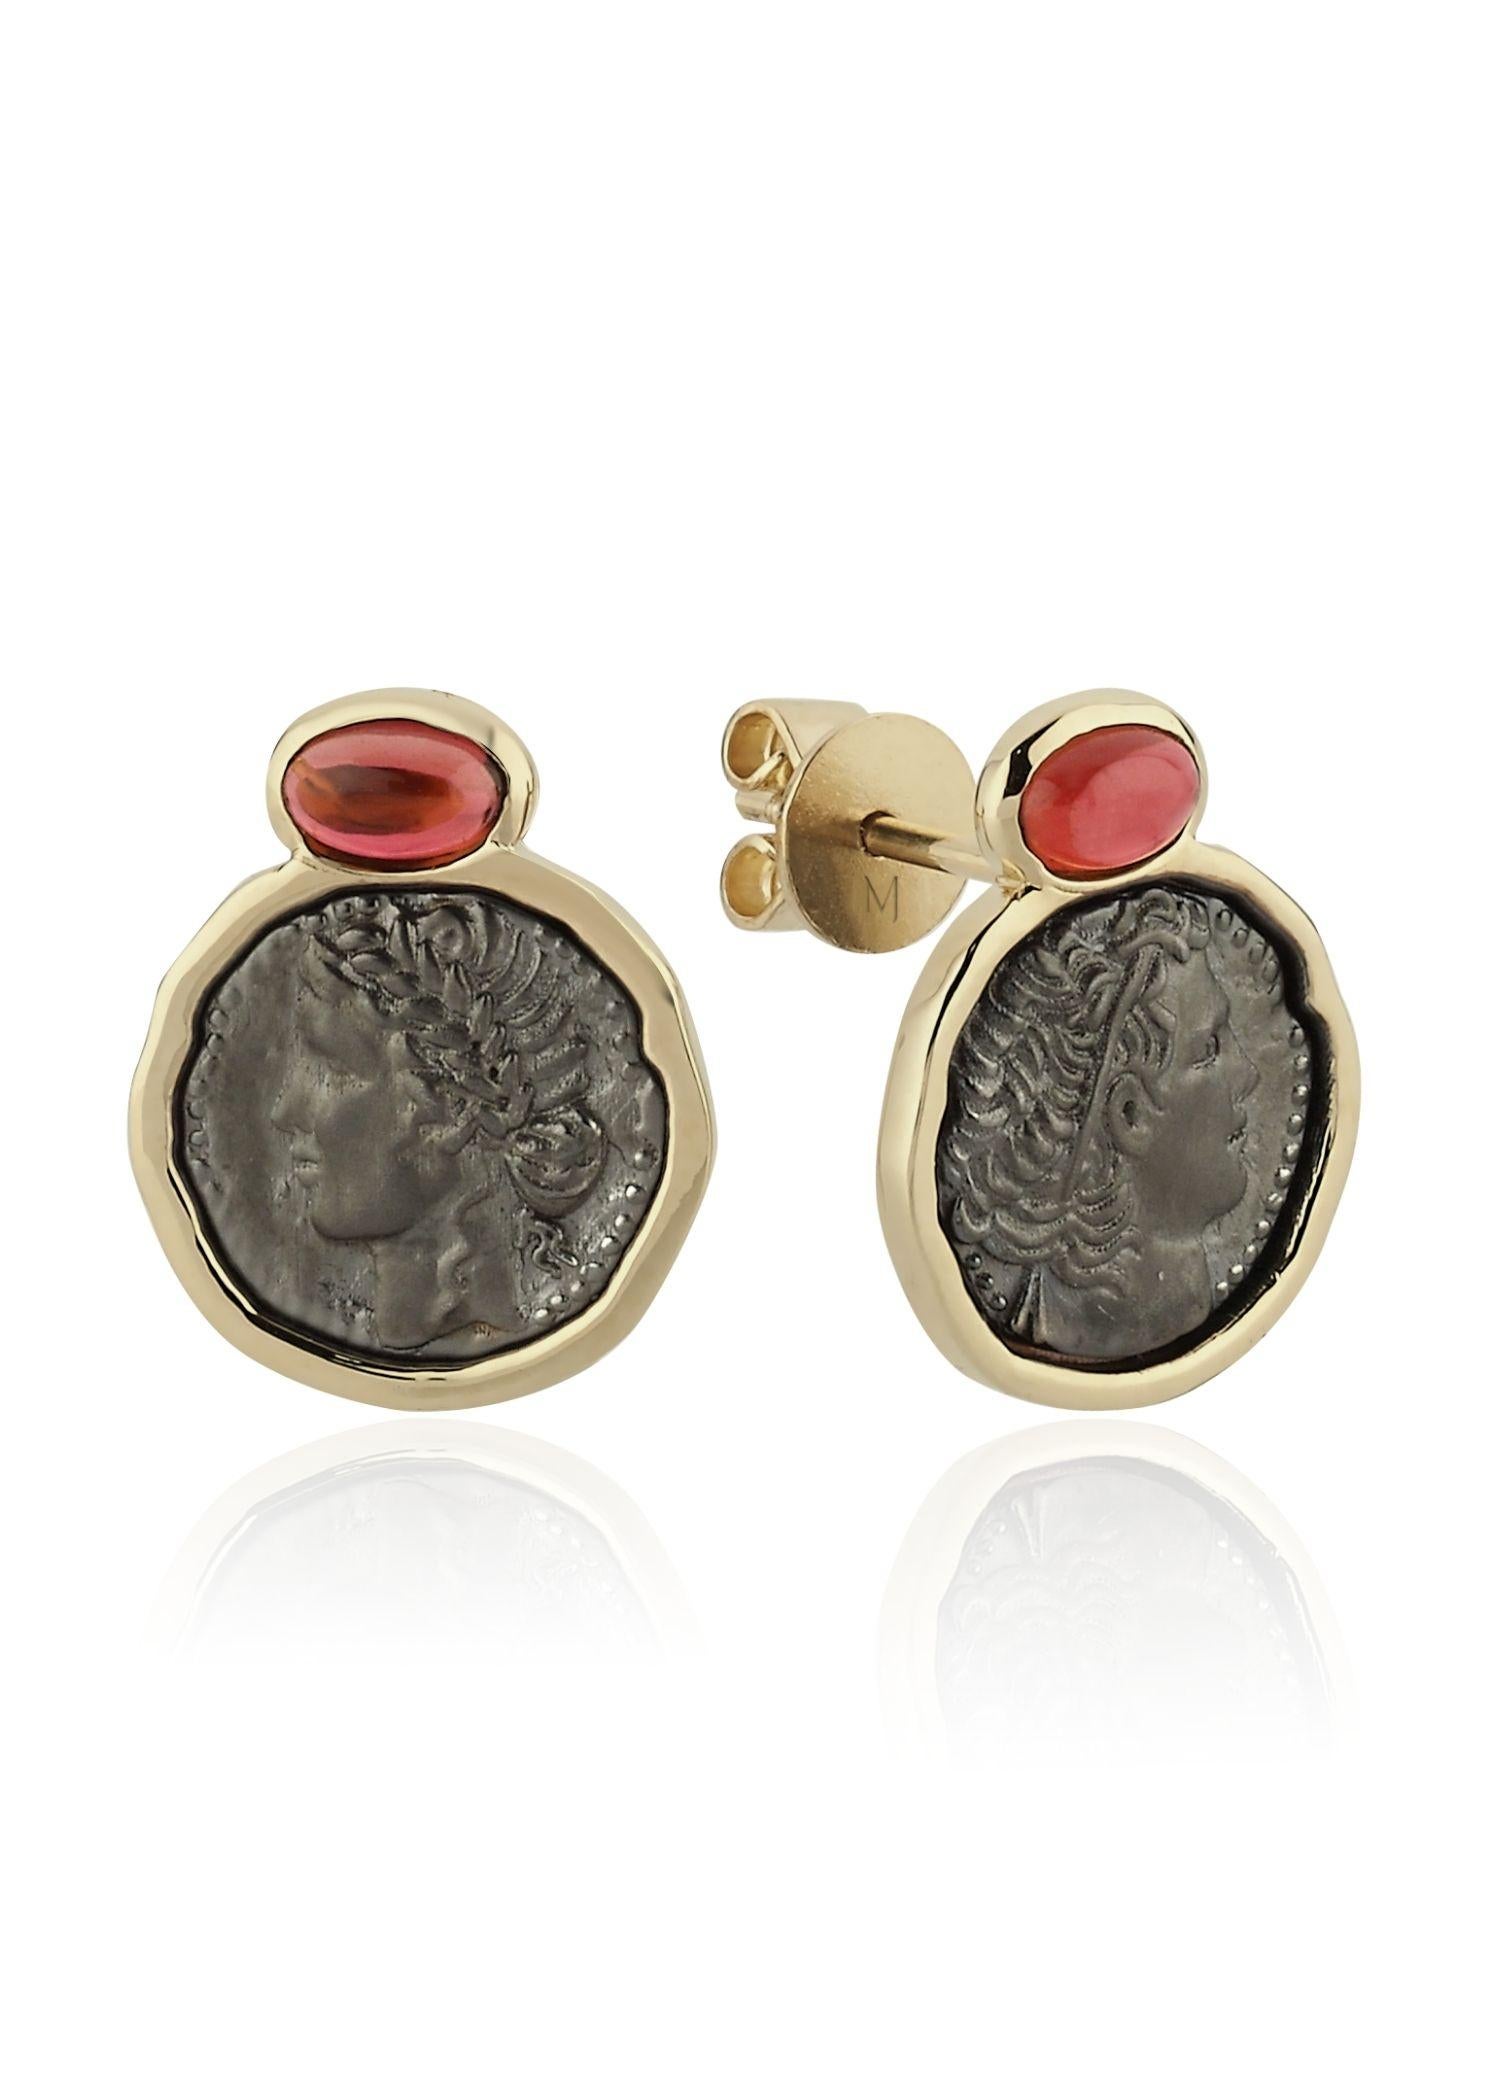 Melie Jewelry Cleopatra & Marcus Earrings

14K Yellow Gold, 0.70 ct Pink Tourmaline, 1.30 g Oxidized 925 Sterling Silver

The Story Behind
The collection inspired by one of William Shakespeare's most famous tragedies, 